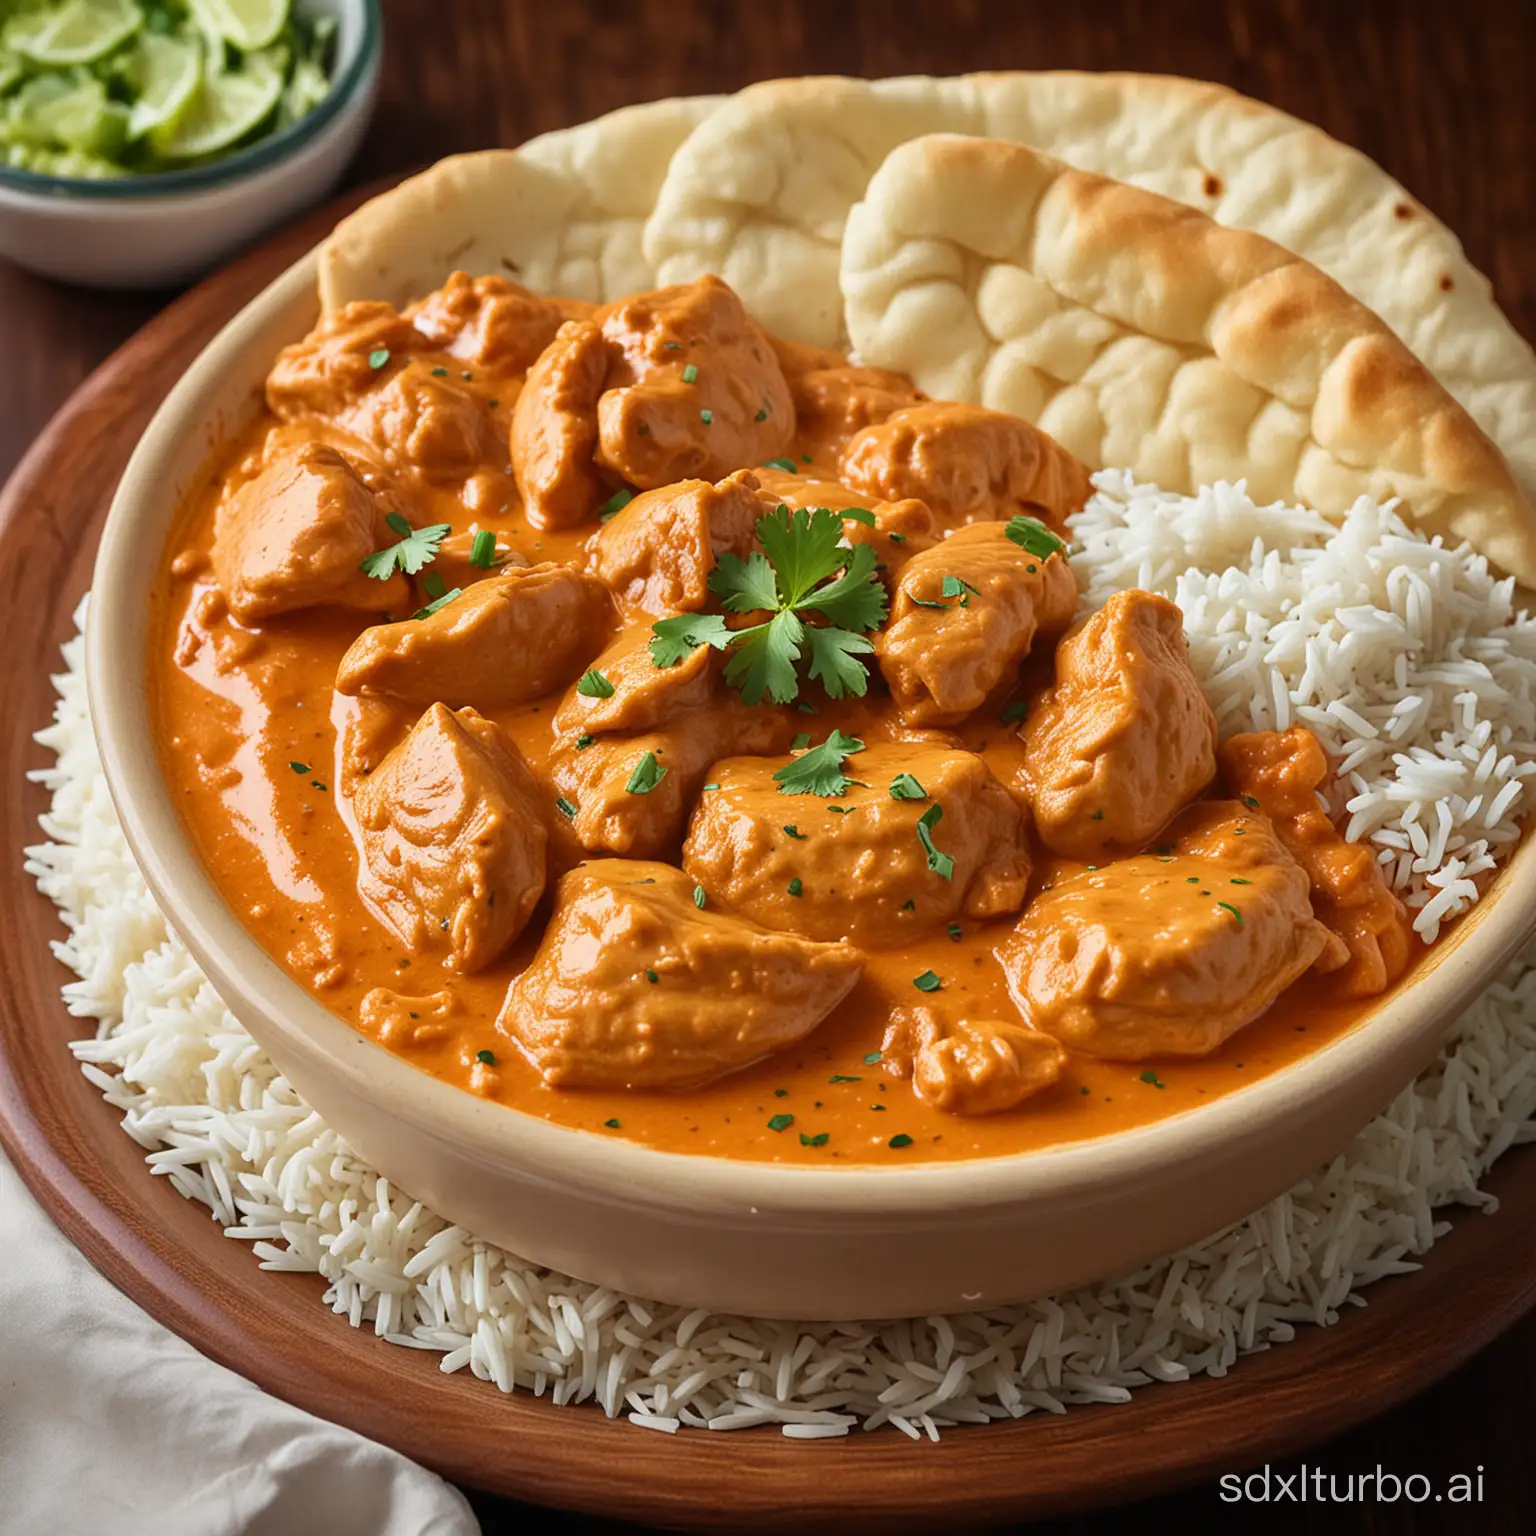 Savory-Butter-Chicken-Feast-with-Naan-Bread-and-Basmati-Rice